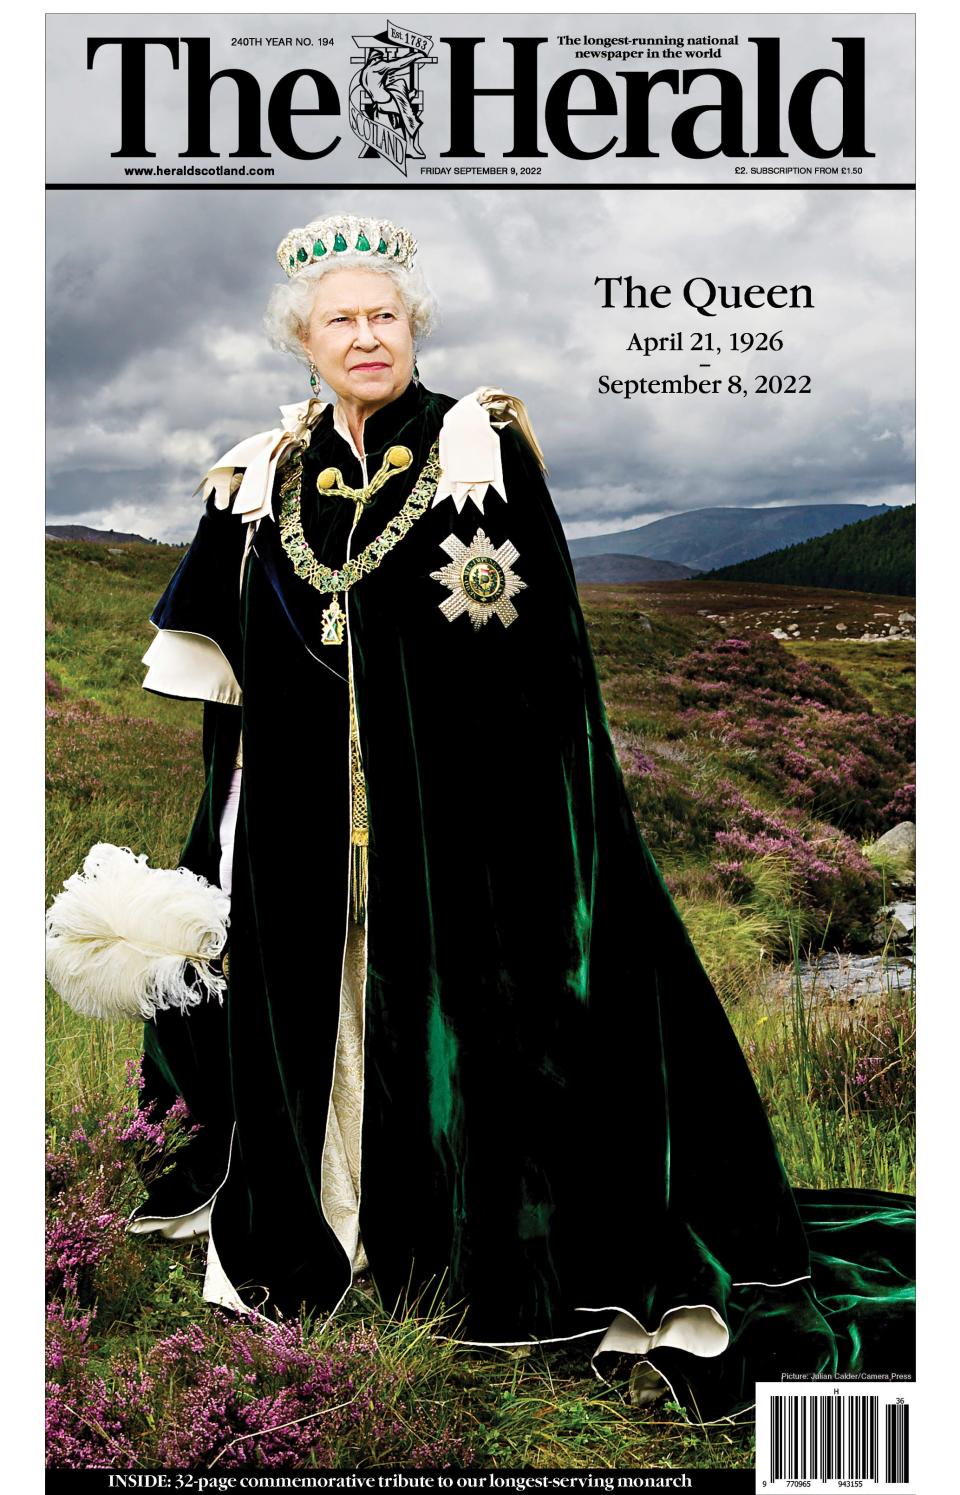 Scotland's The Herald newspaper used a photograph of the Queen on her Balmoral estate.